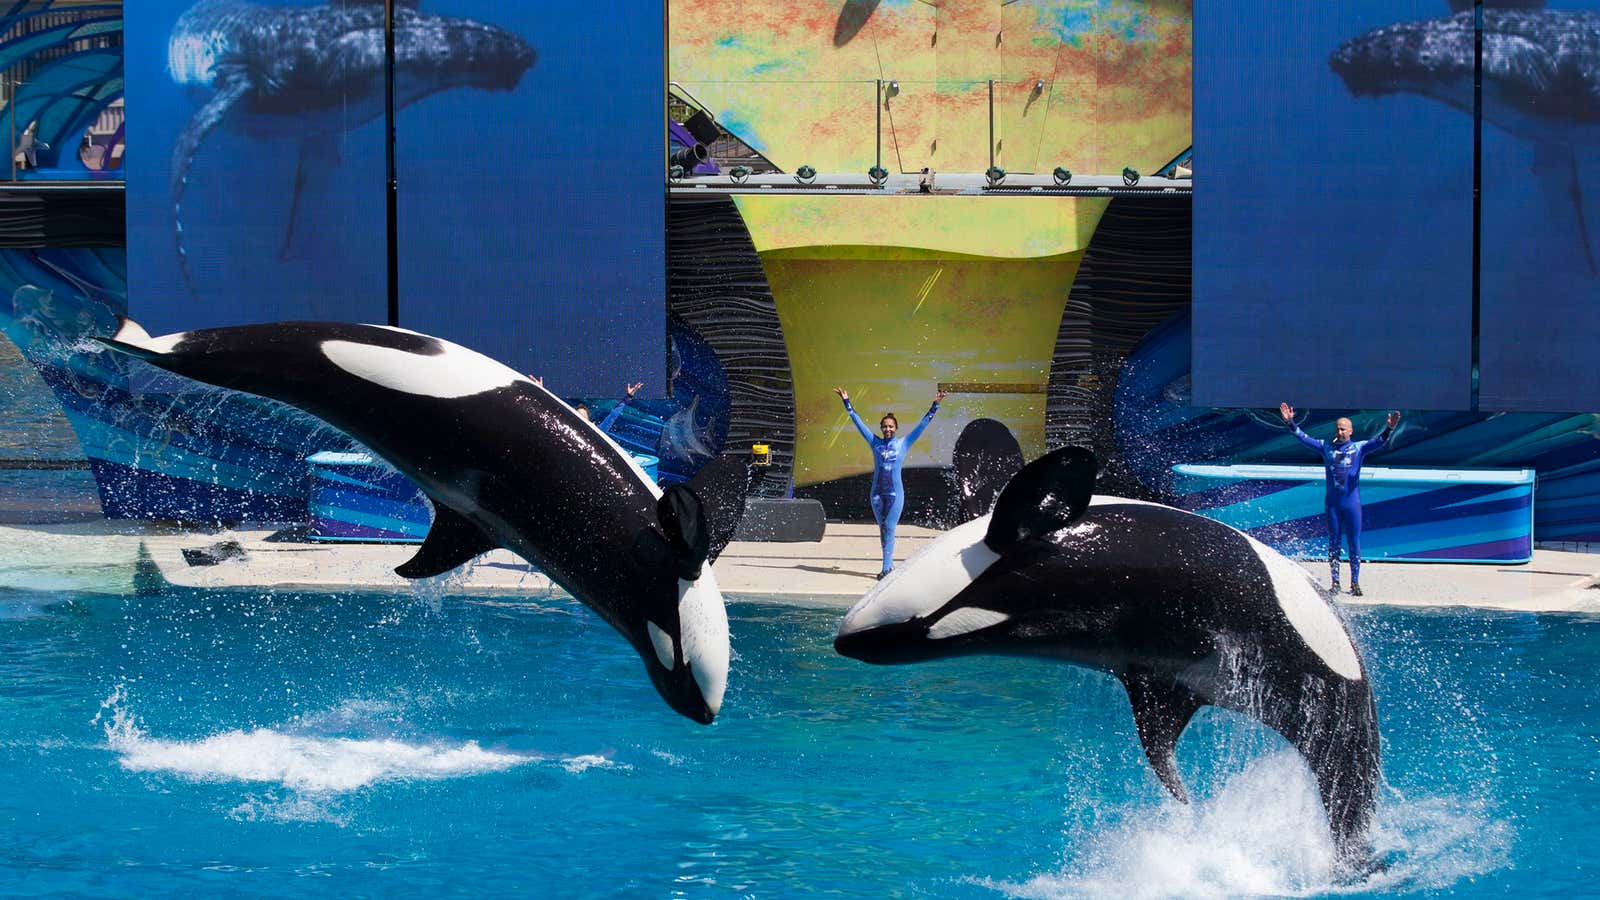 SeaWorld’s lawyers are doubling down for another fight over killer whales.